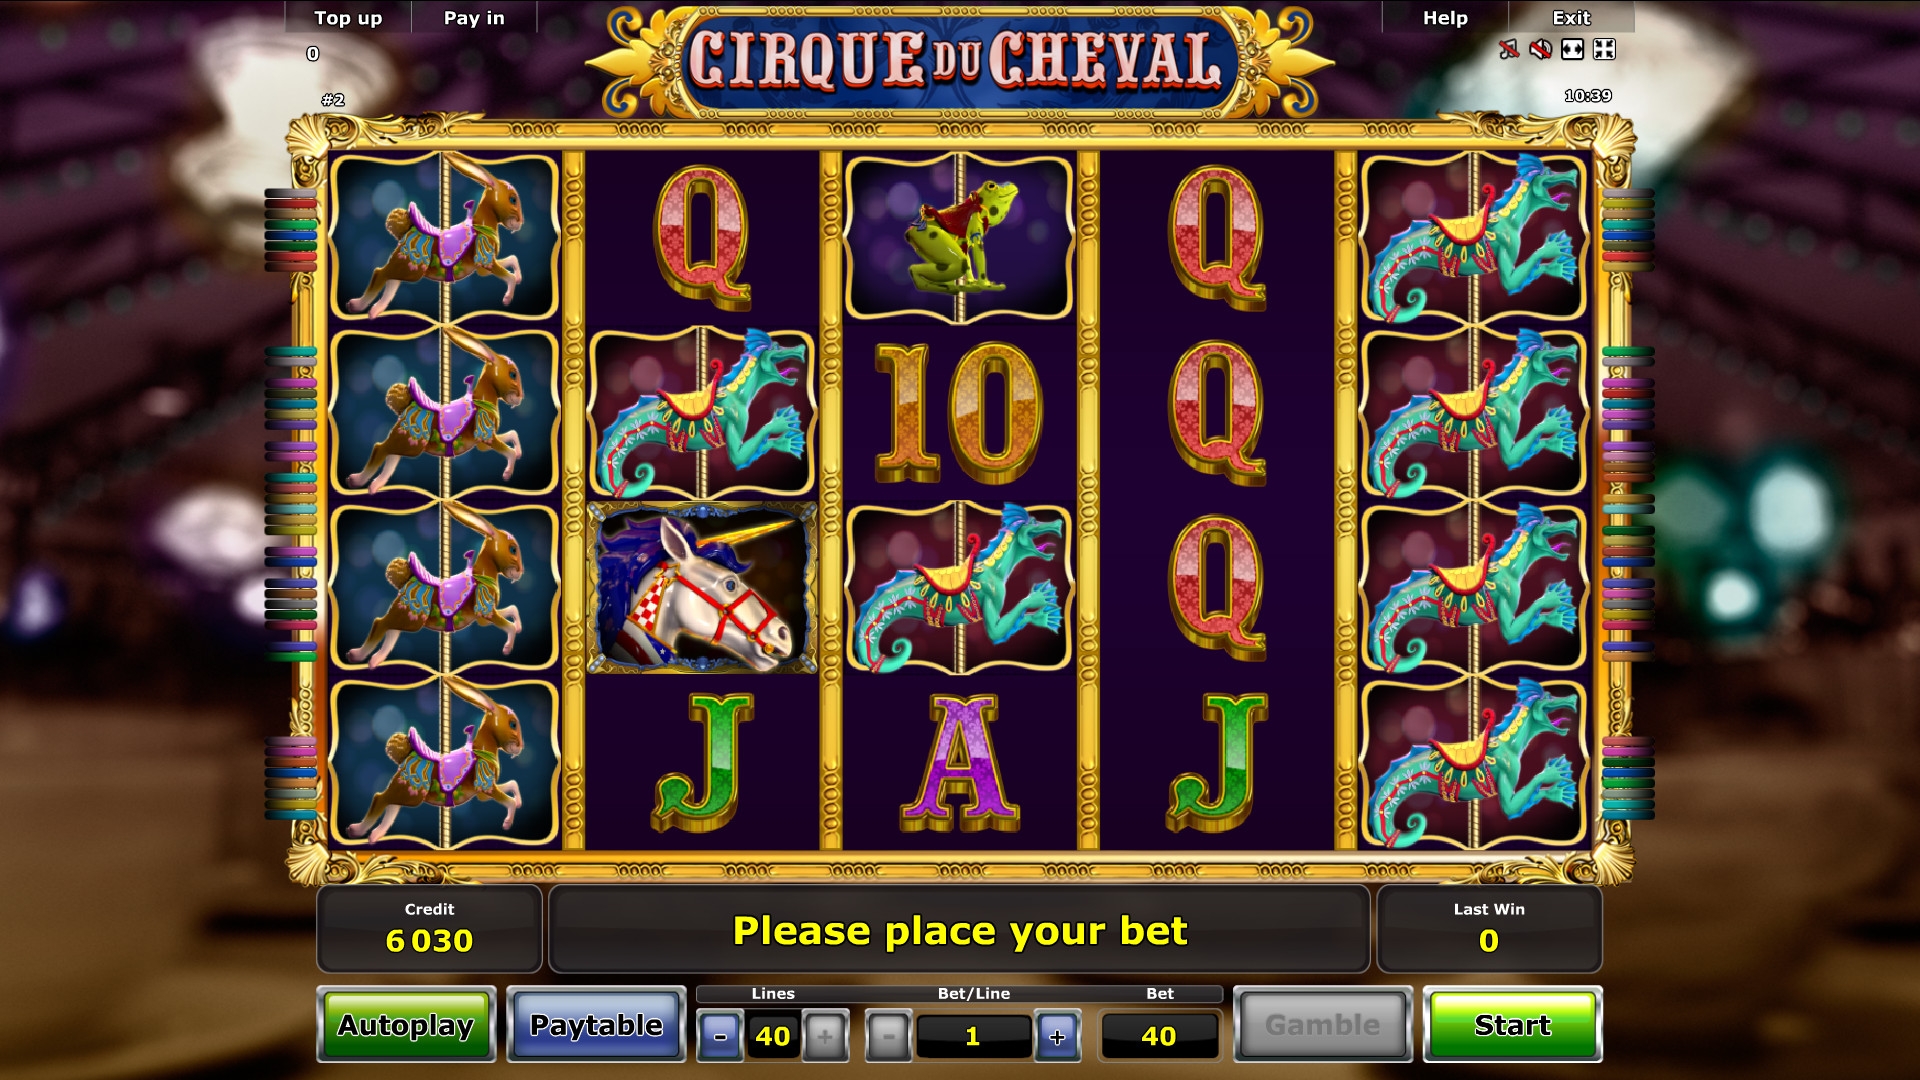 Cirque du Cheval (Cirque du Cheval) from category Slots